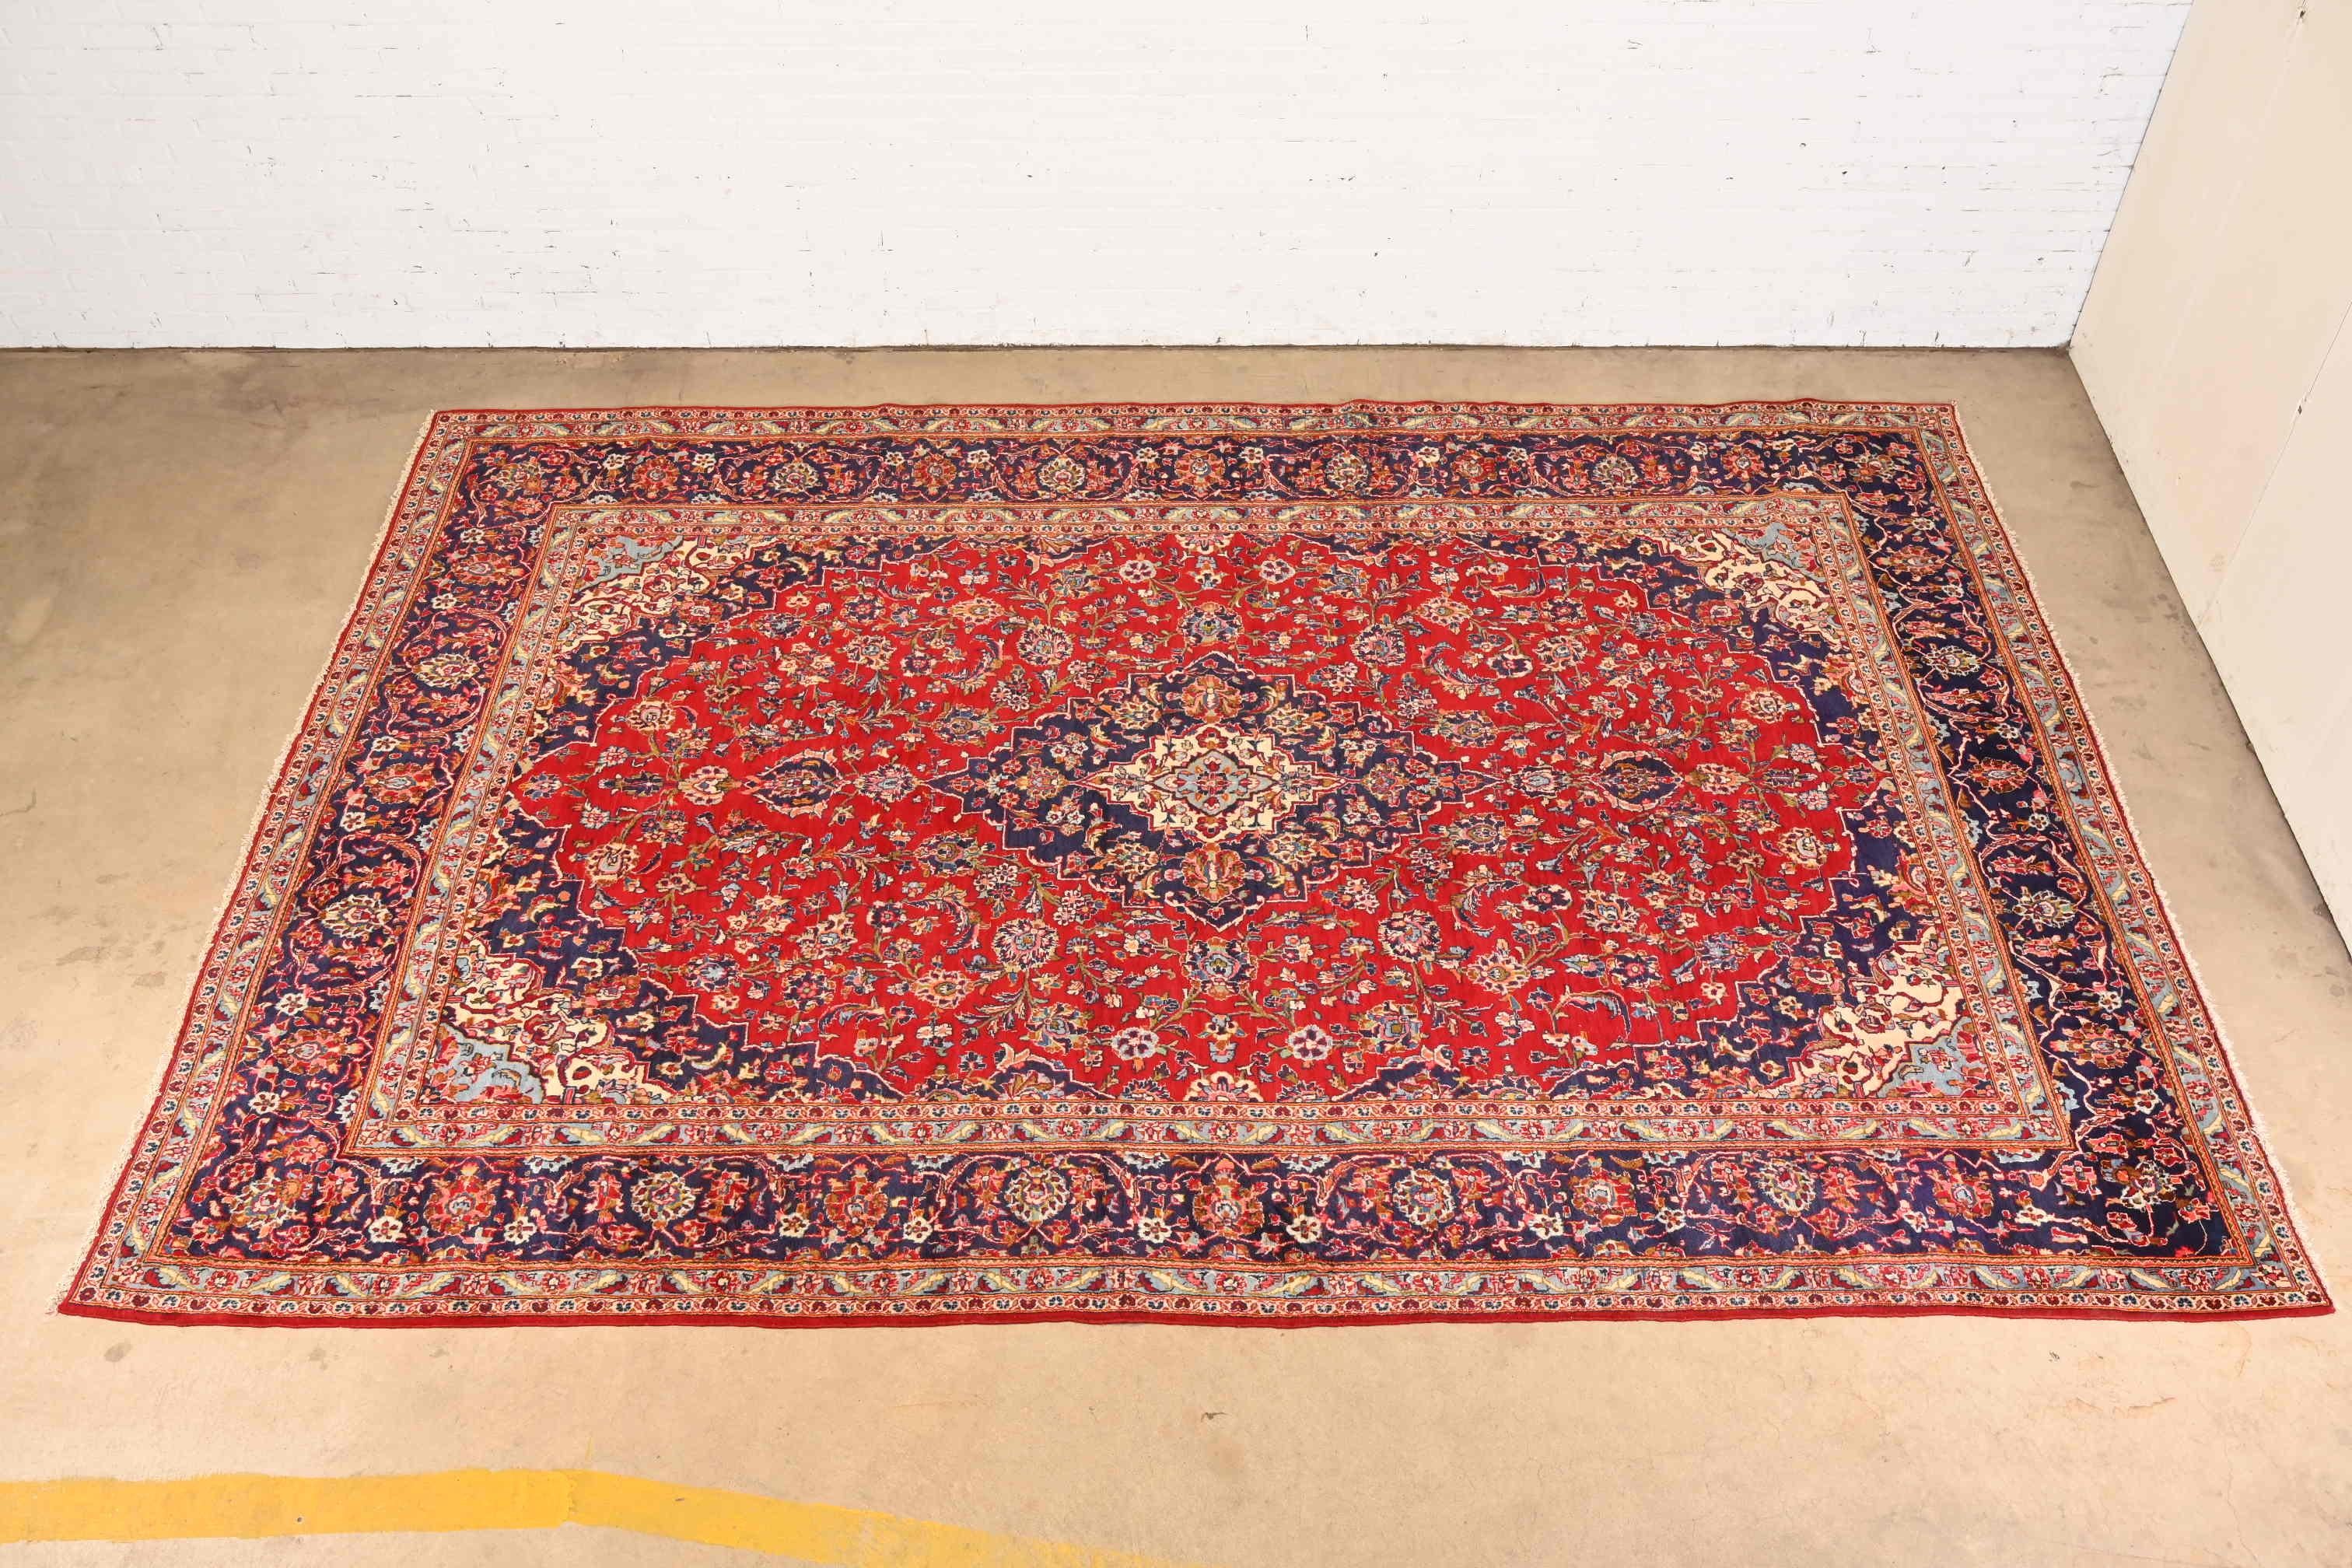 A gorgeous vintage hand-knotted Persian Kashan room size wool rug

Circa Mid-20th Century

Beautiful floral design, with predominant colors in red, blue, and ivory.

Measures: 9'8